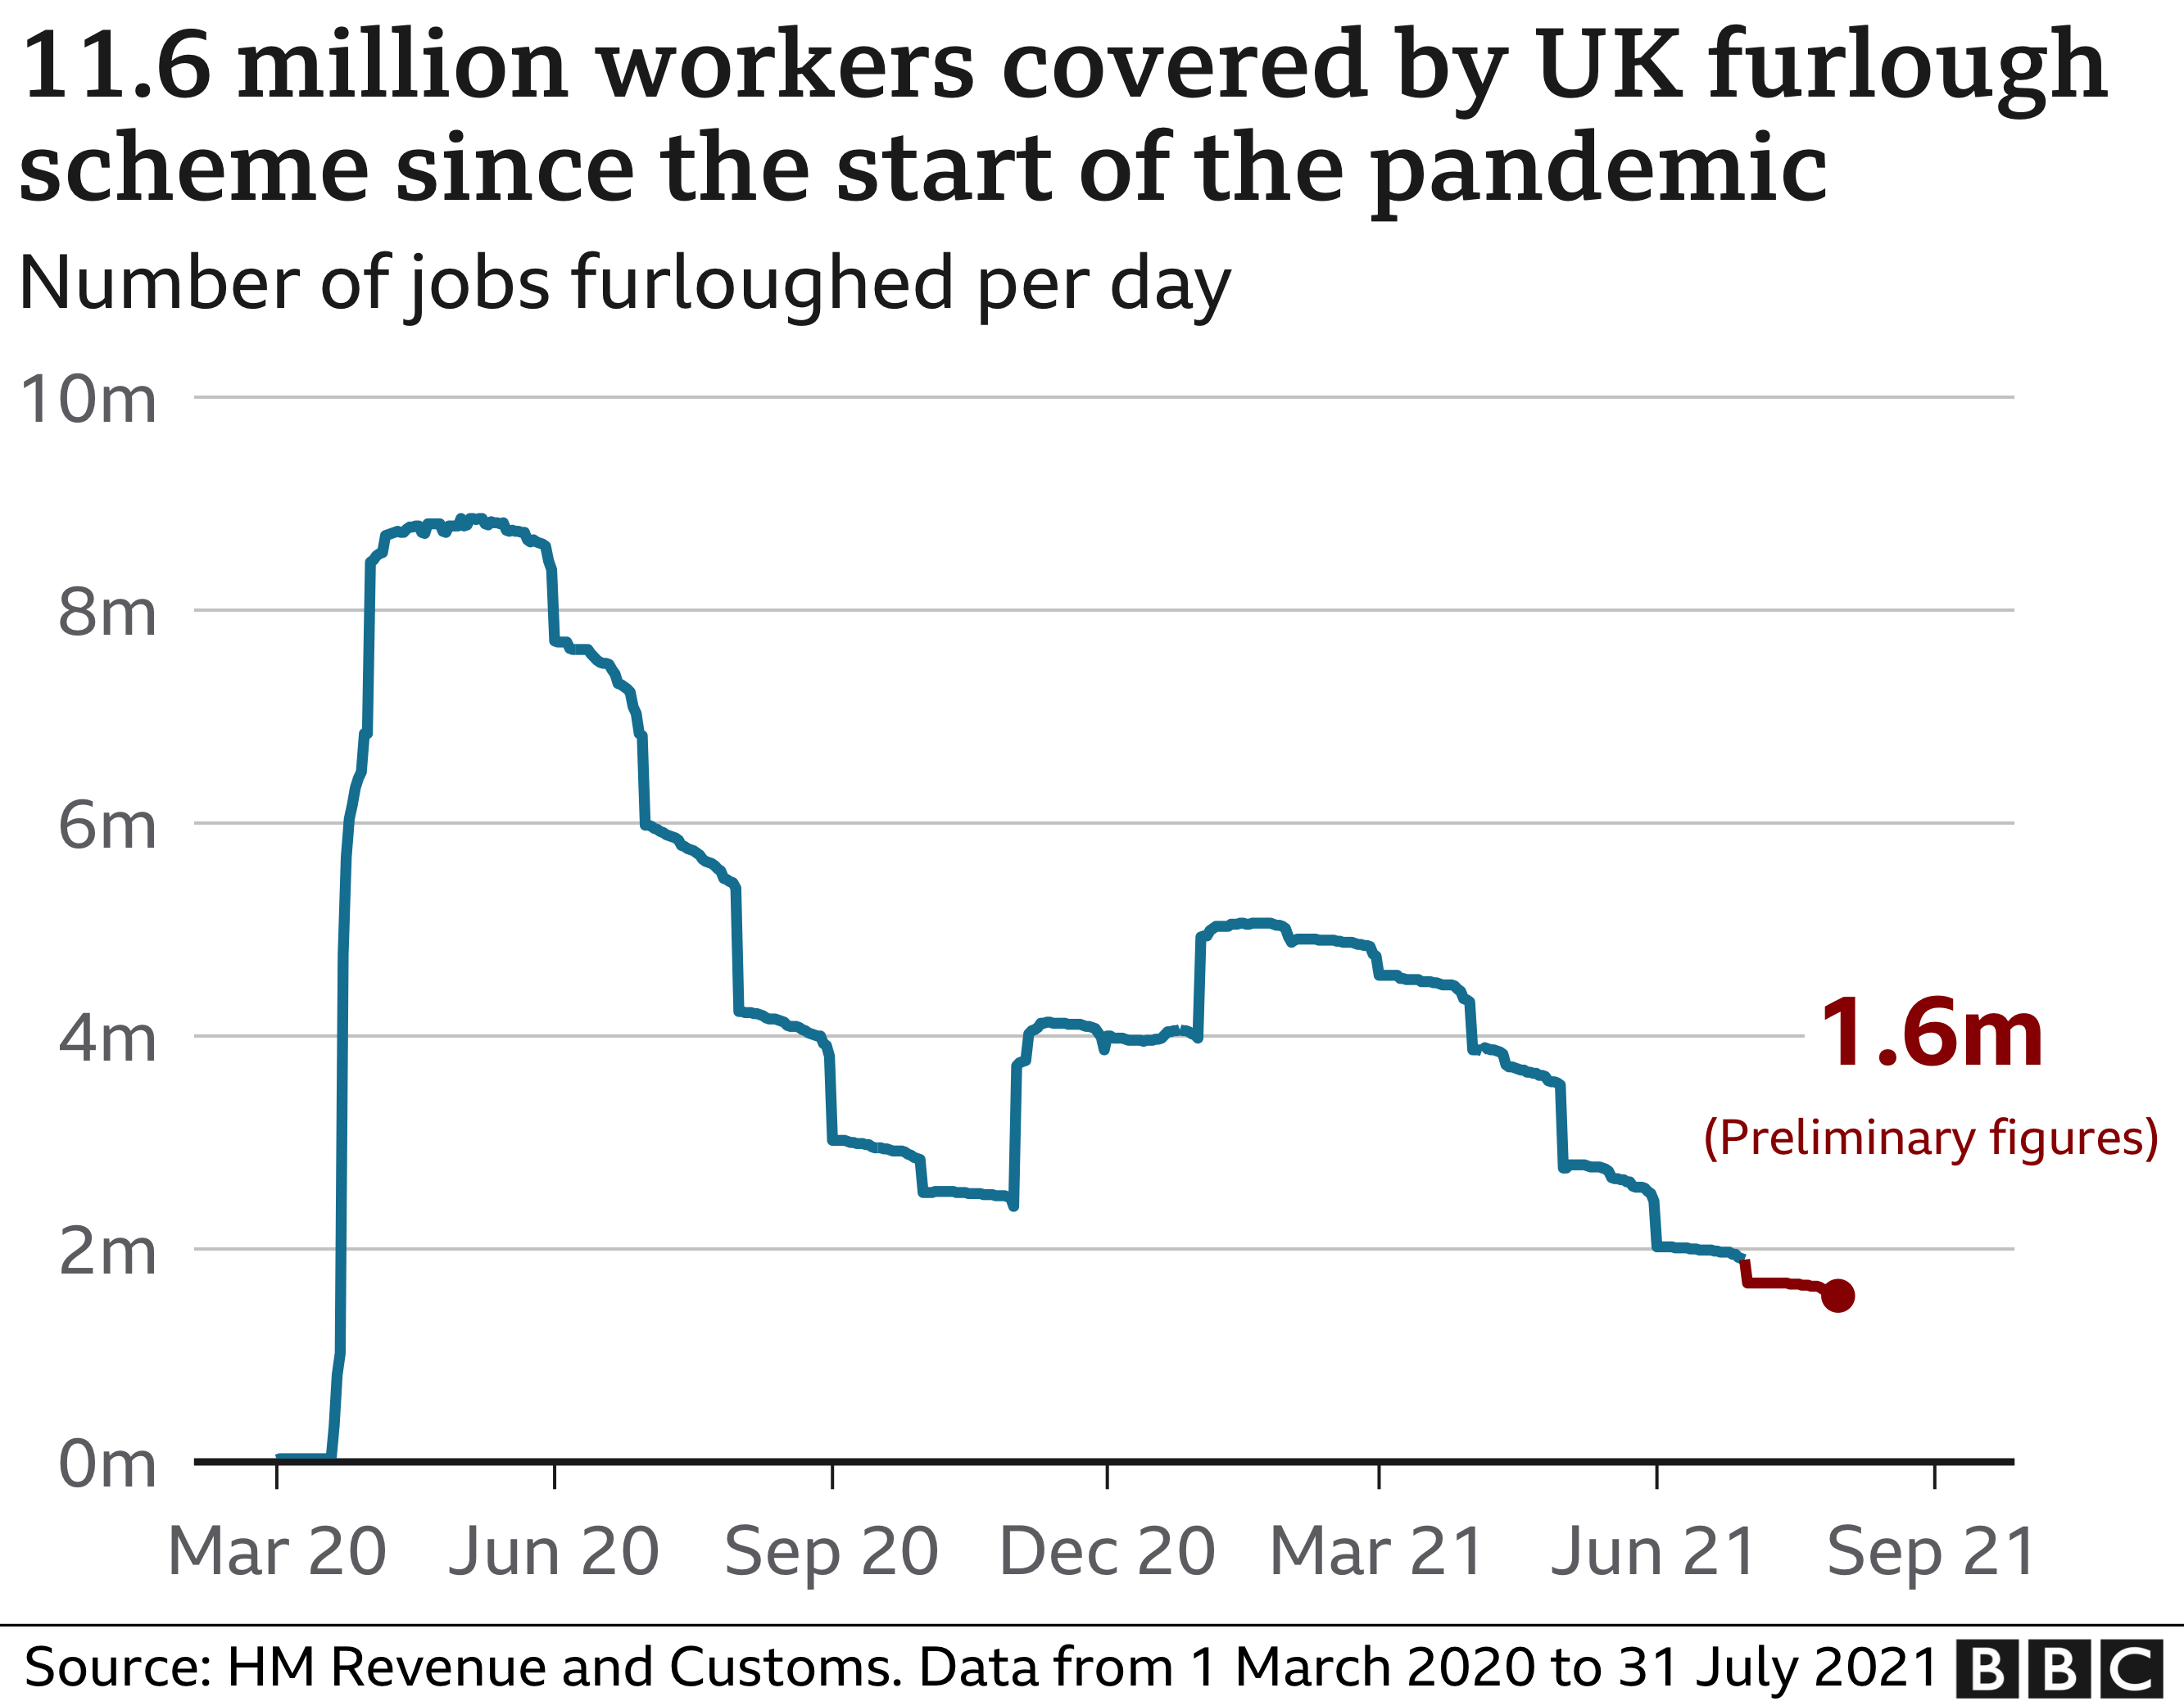 Half of businesses would have to lay off staff within three months if  furlough scheme ended